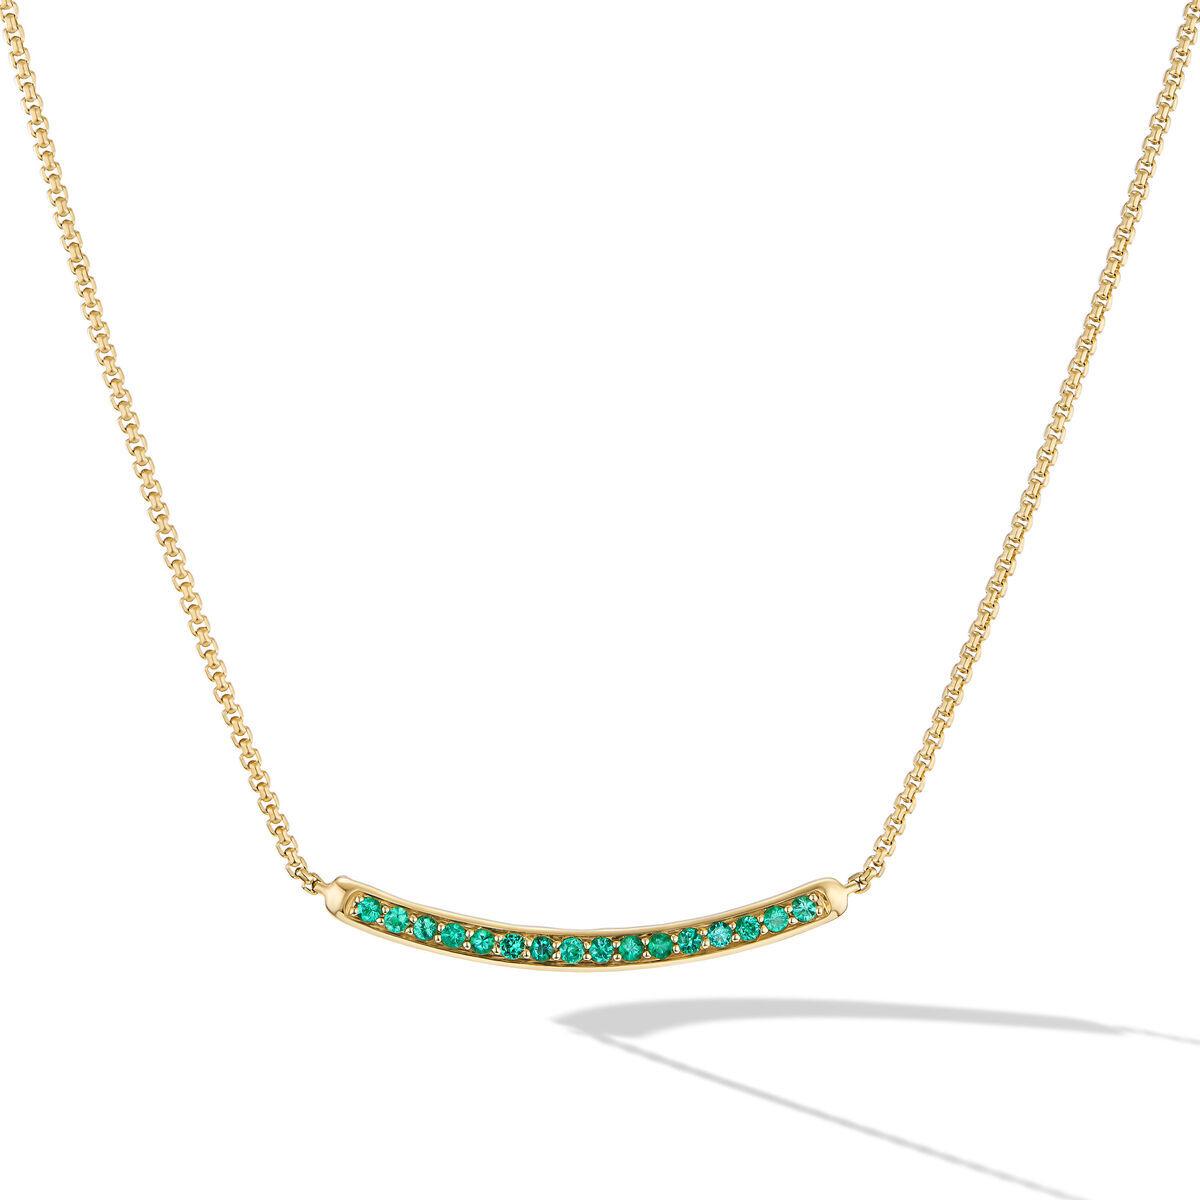 David Yurman Petite Pavé Bar Necklace in 18K Yellow Gold with Emeralds 0